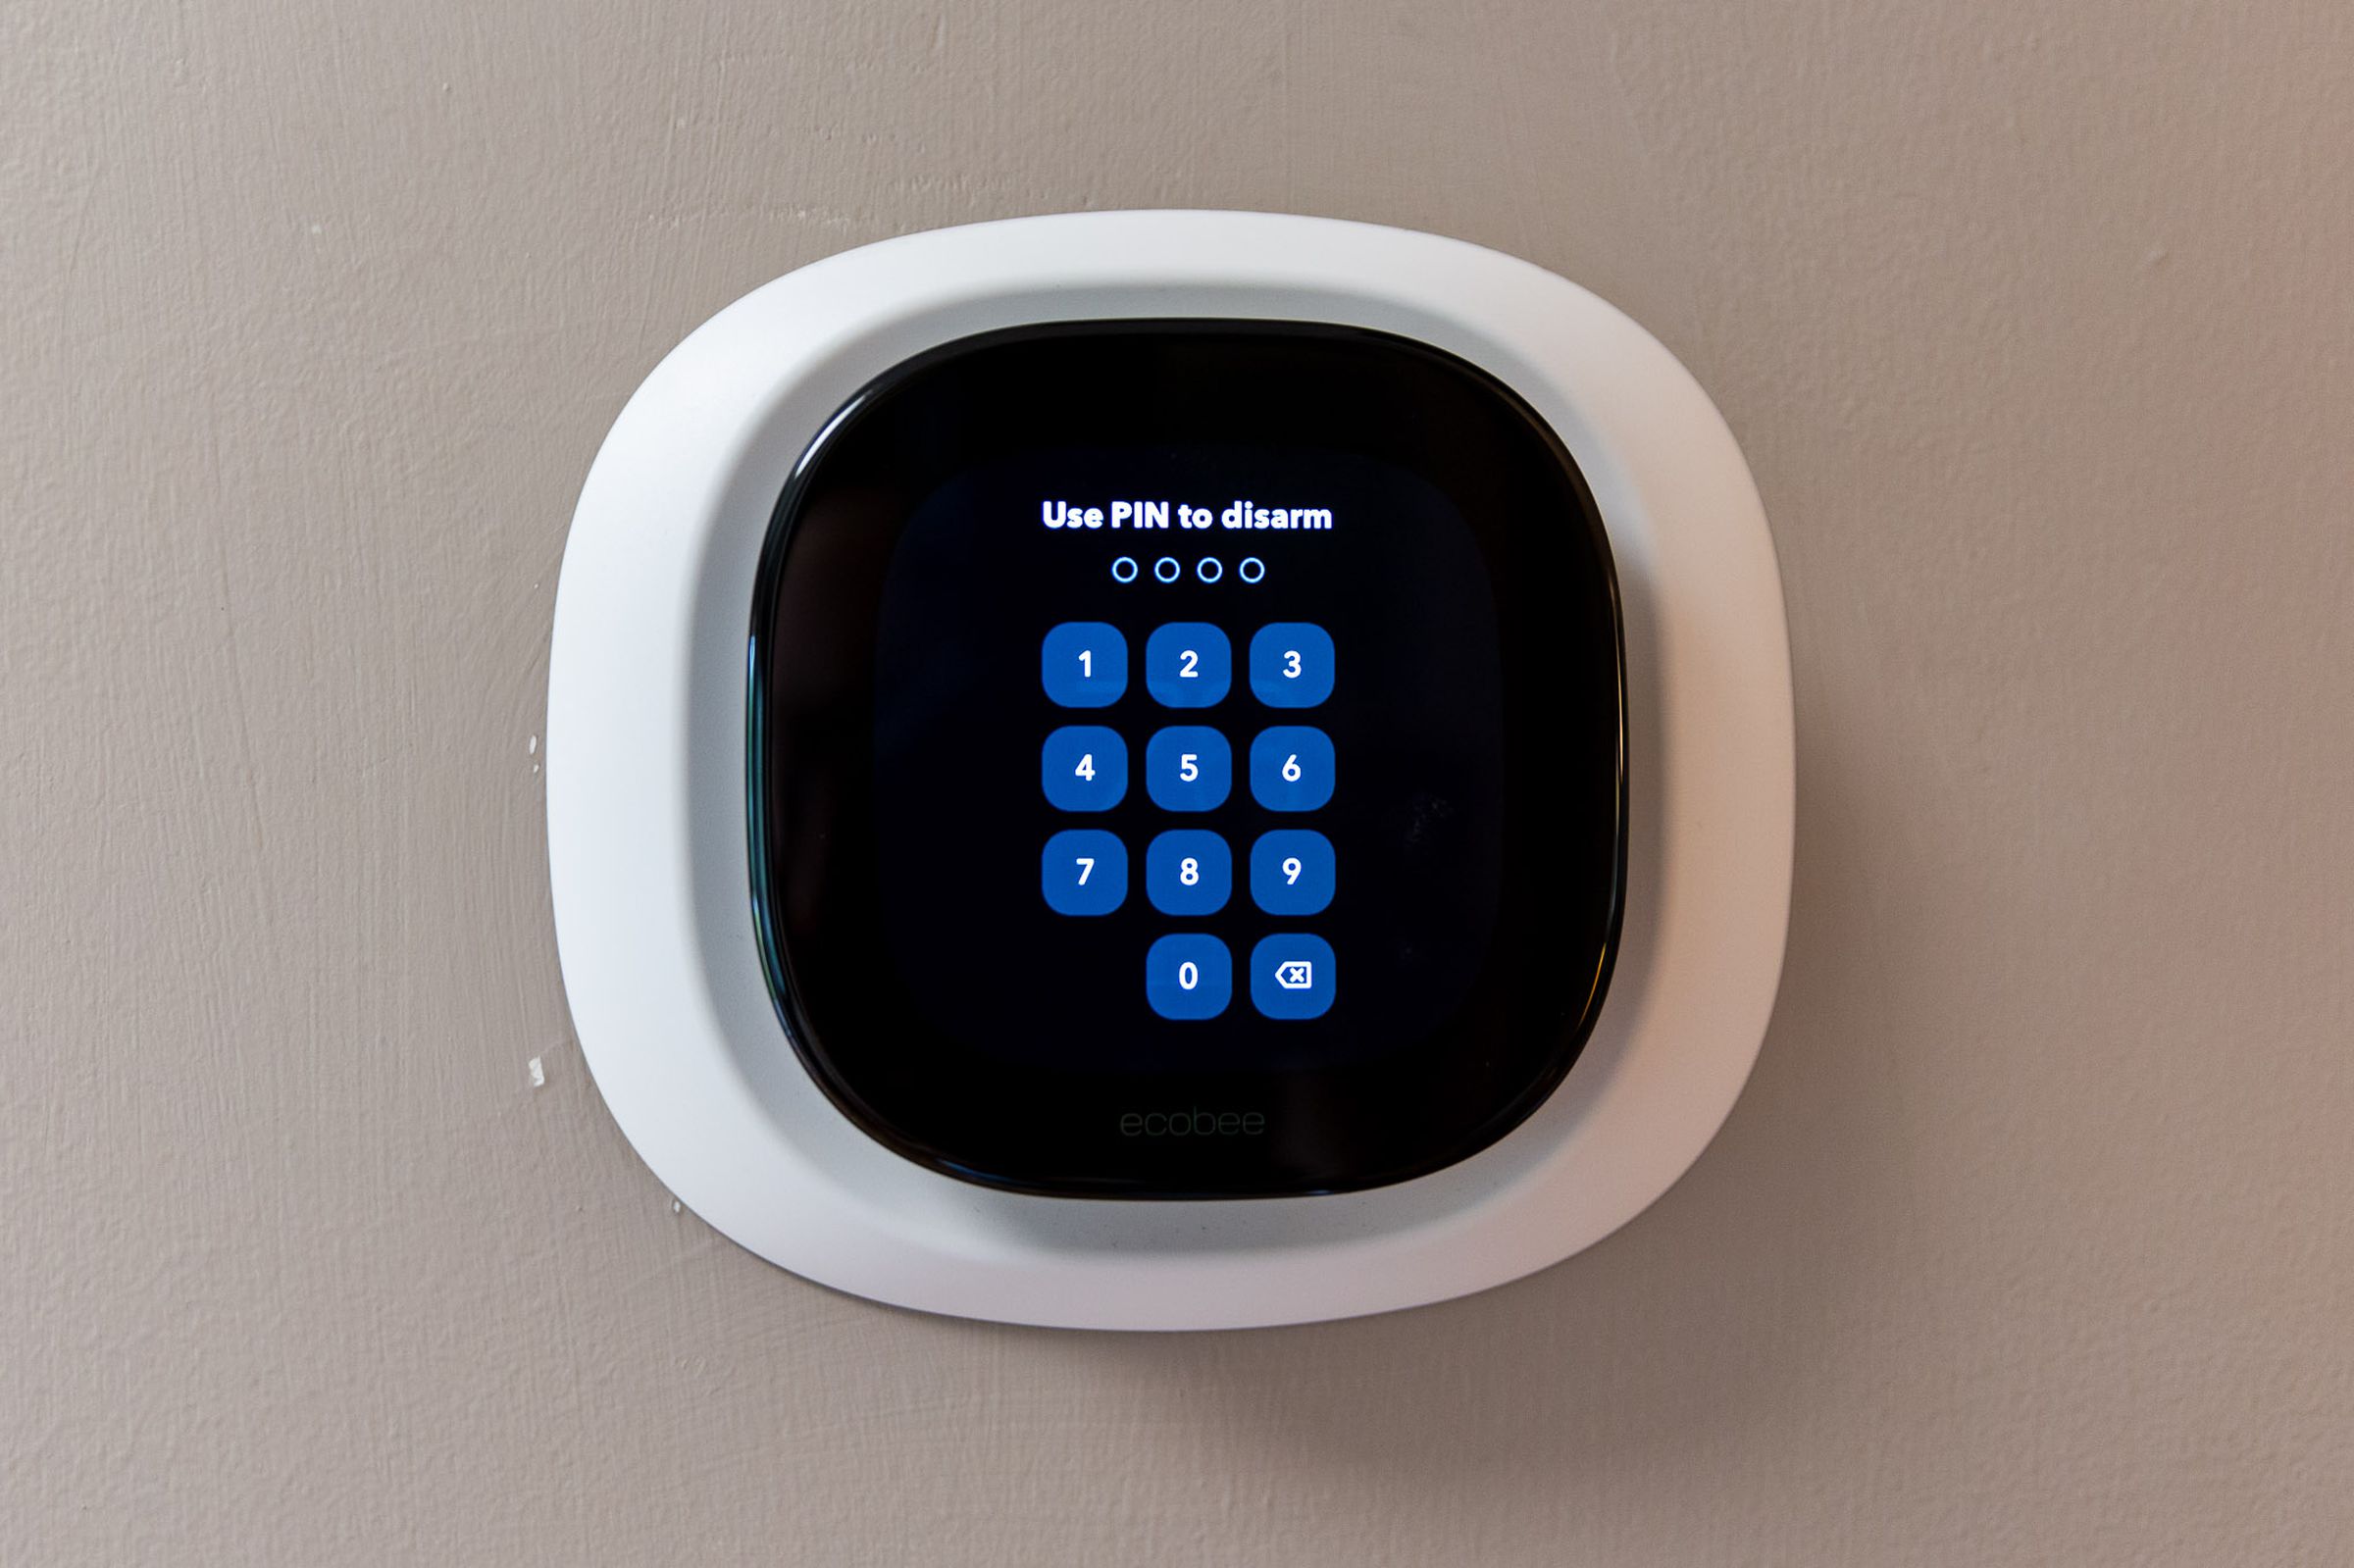 <em>The new keypad feature for disarming the security system. </em>